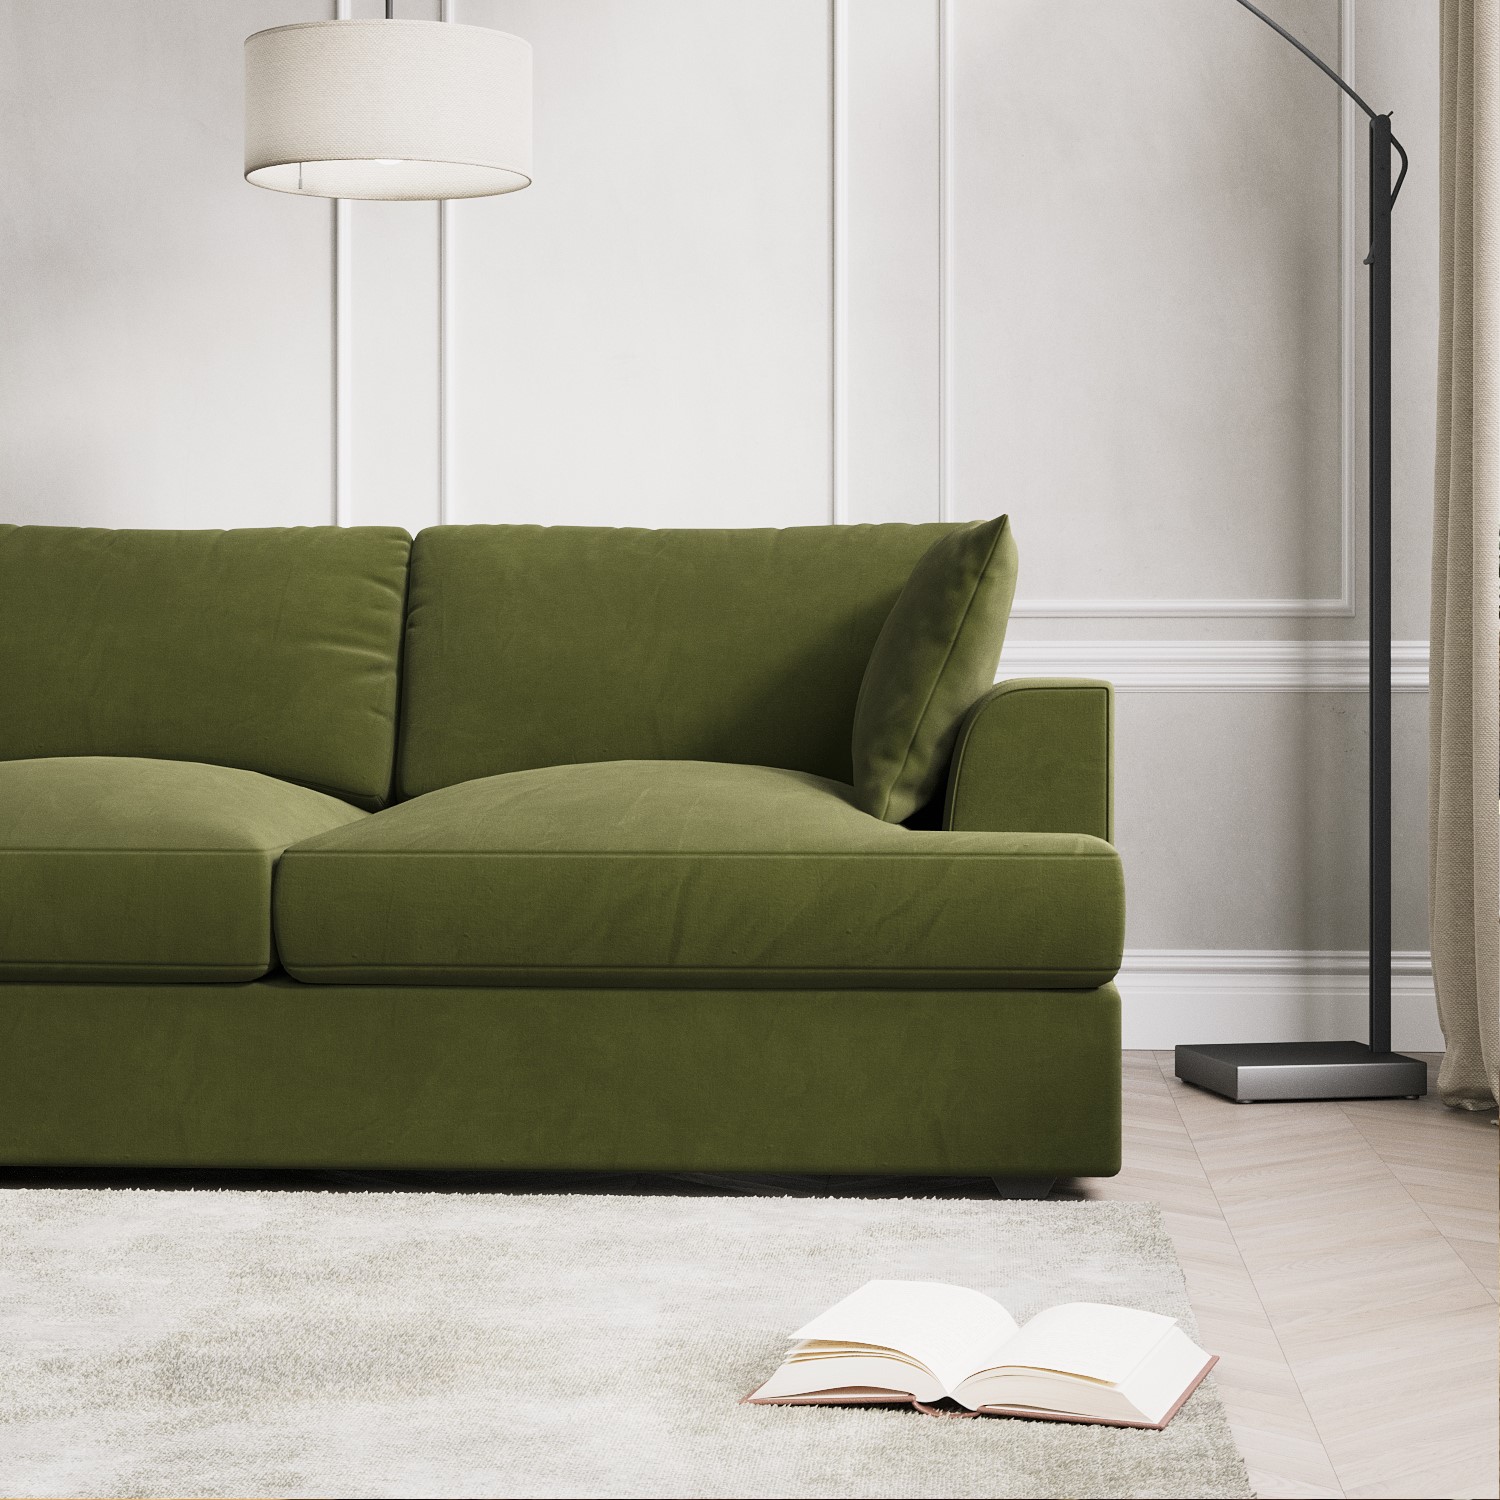 Read more about Olive green velvet left hand l shaped sofa seats 4 august